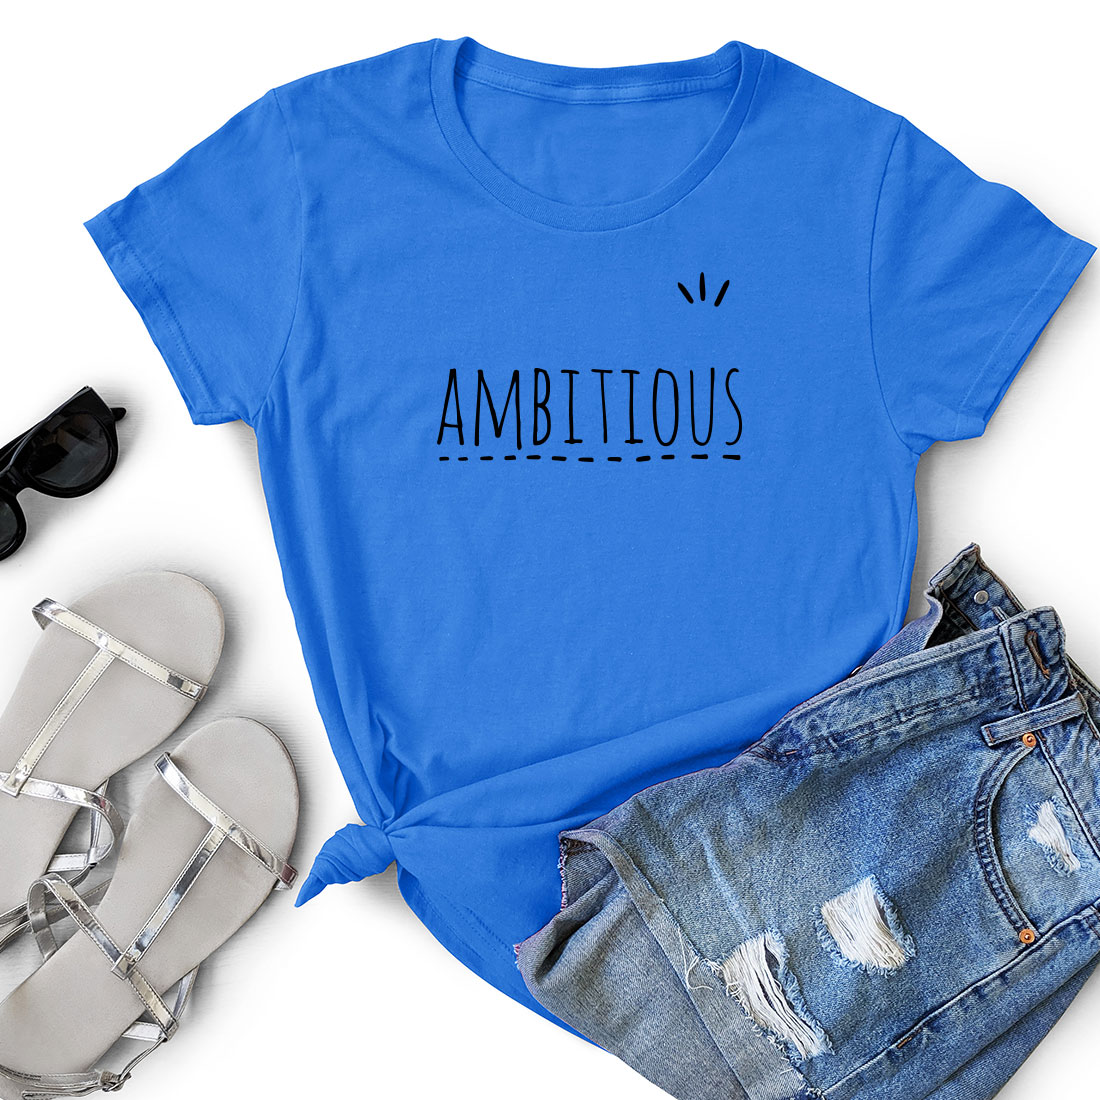 Blue shirt that says ambitious next to a pair of shorts.